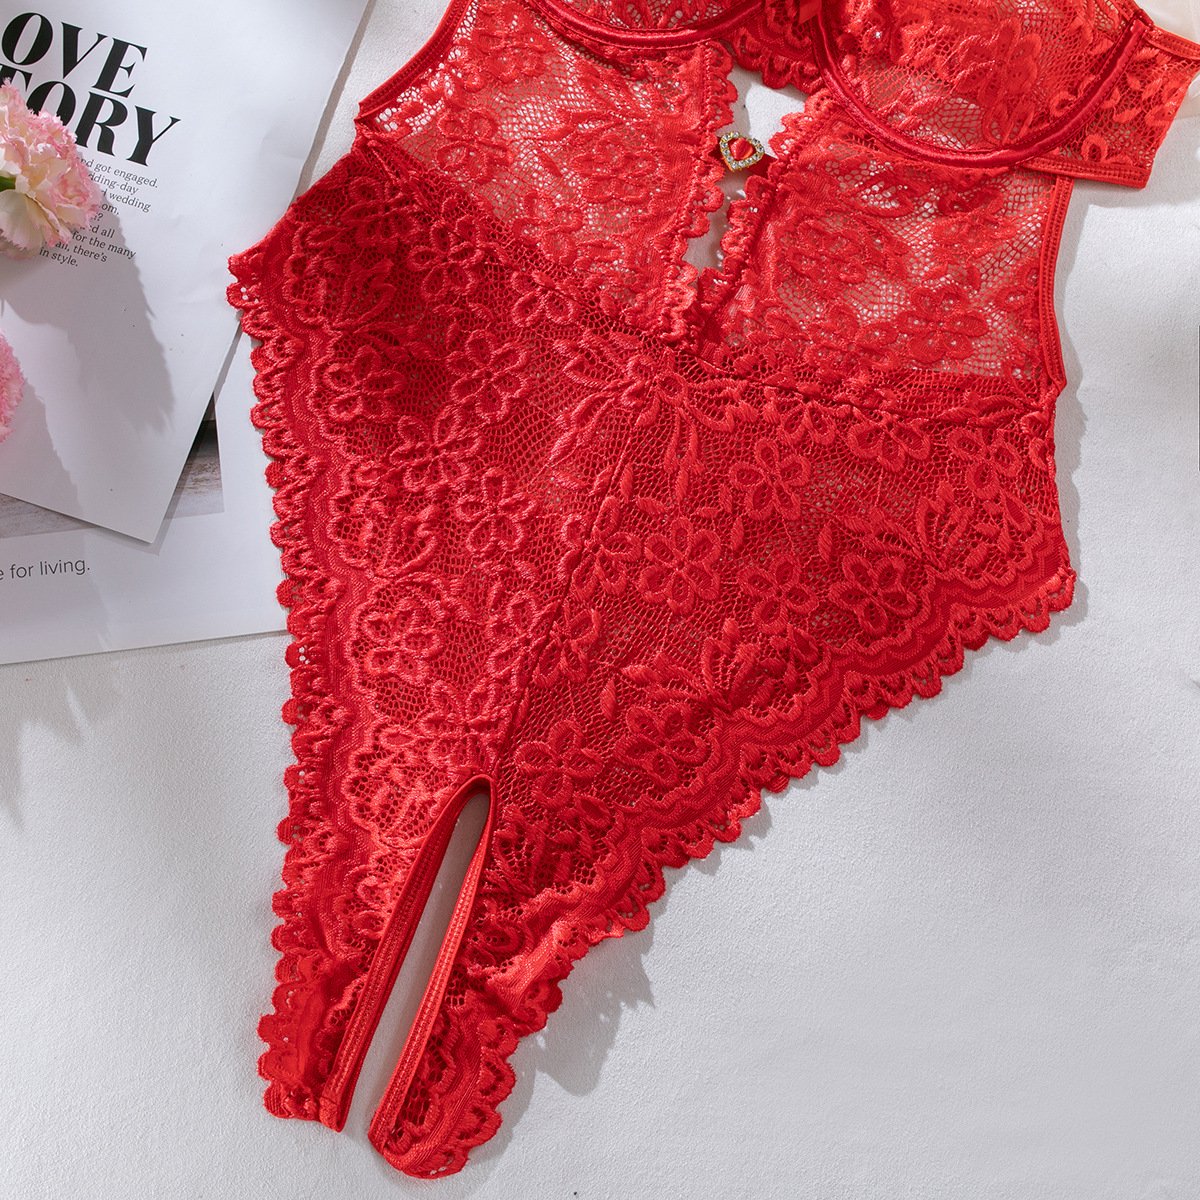 Lace embroidery open crotch lingerie set